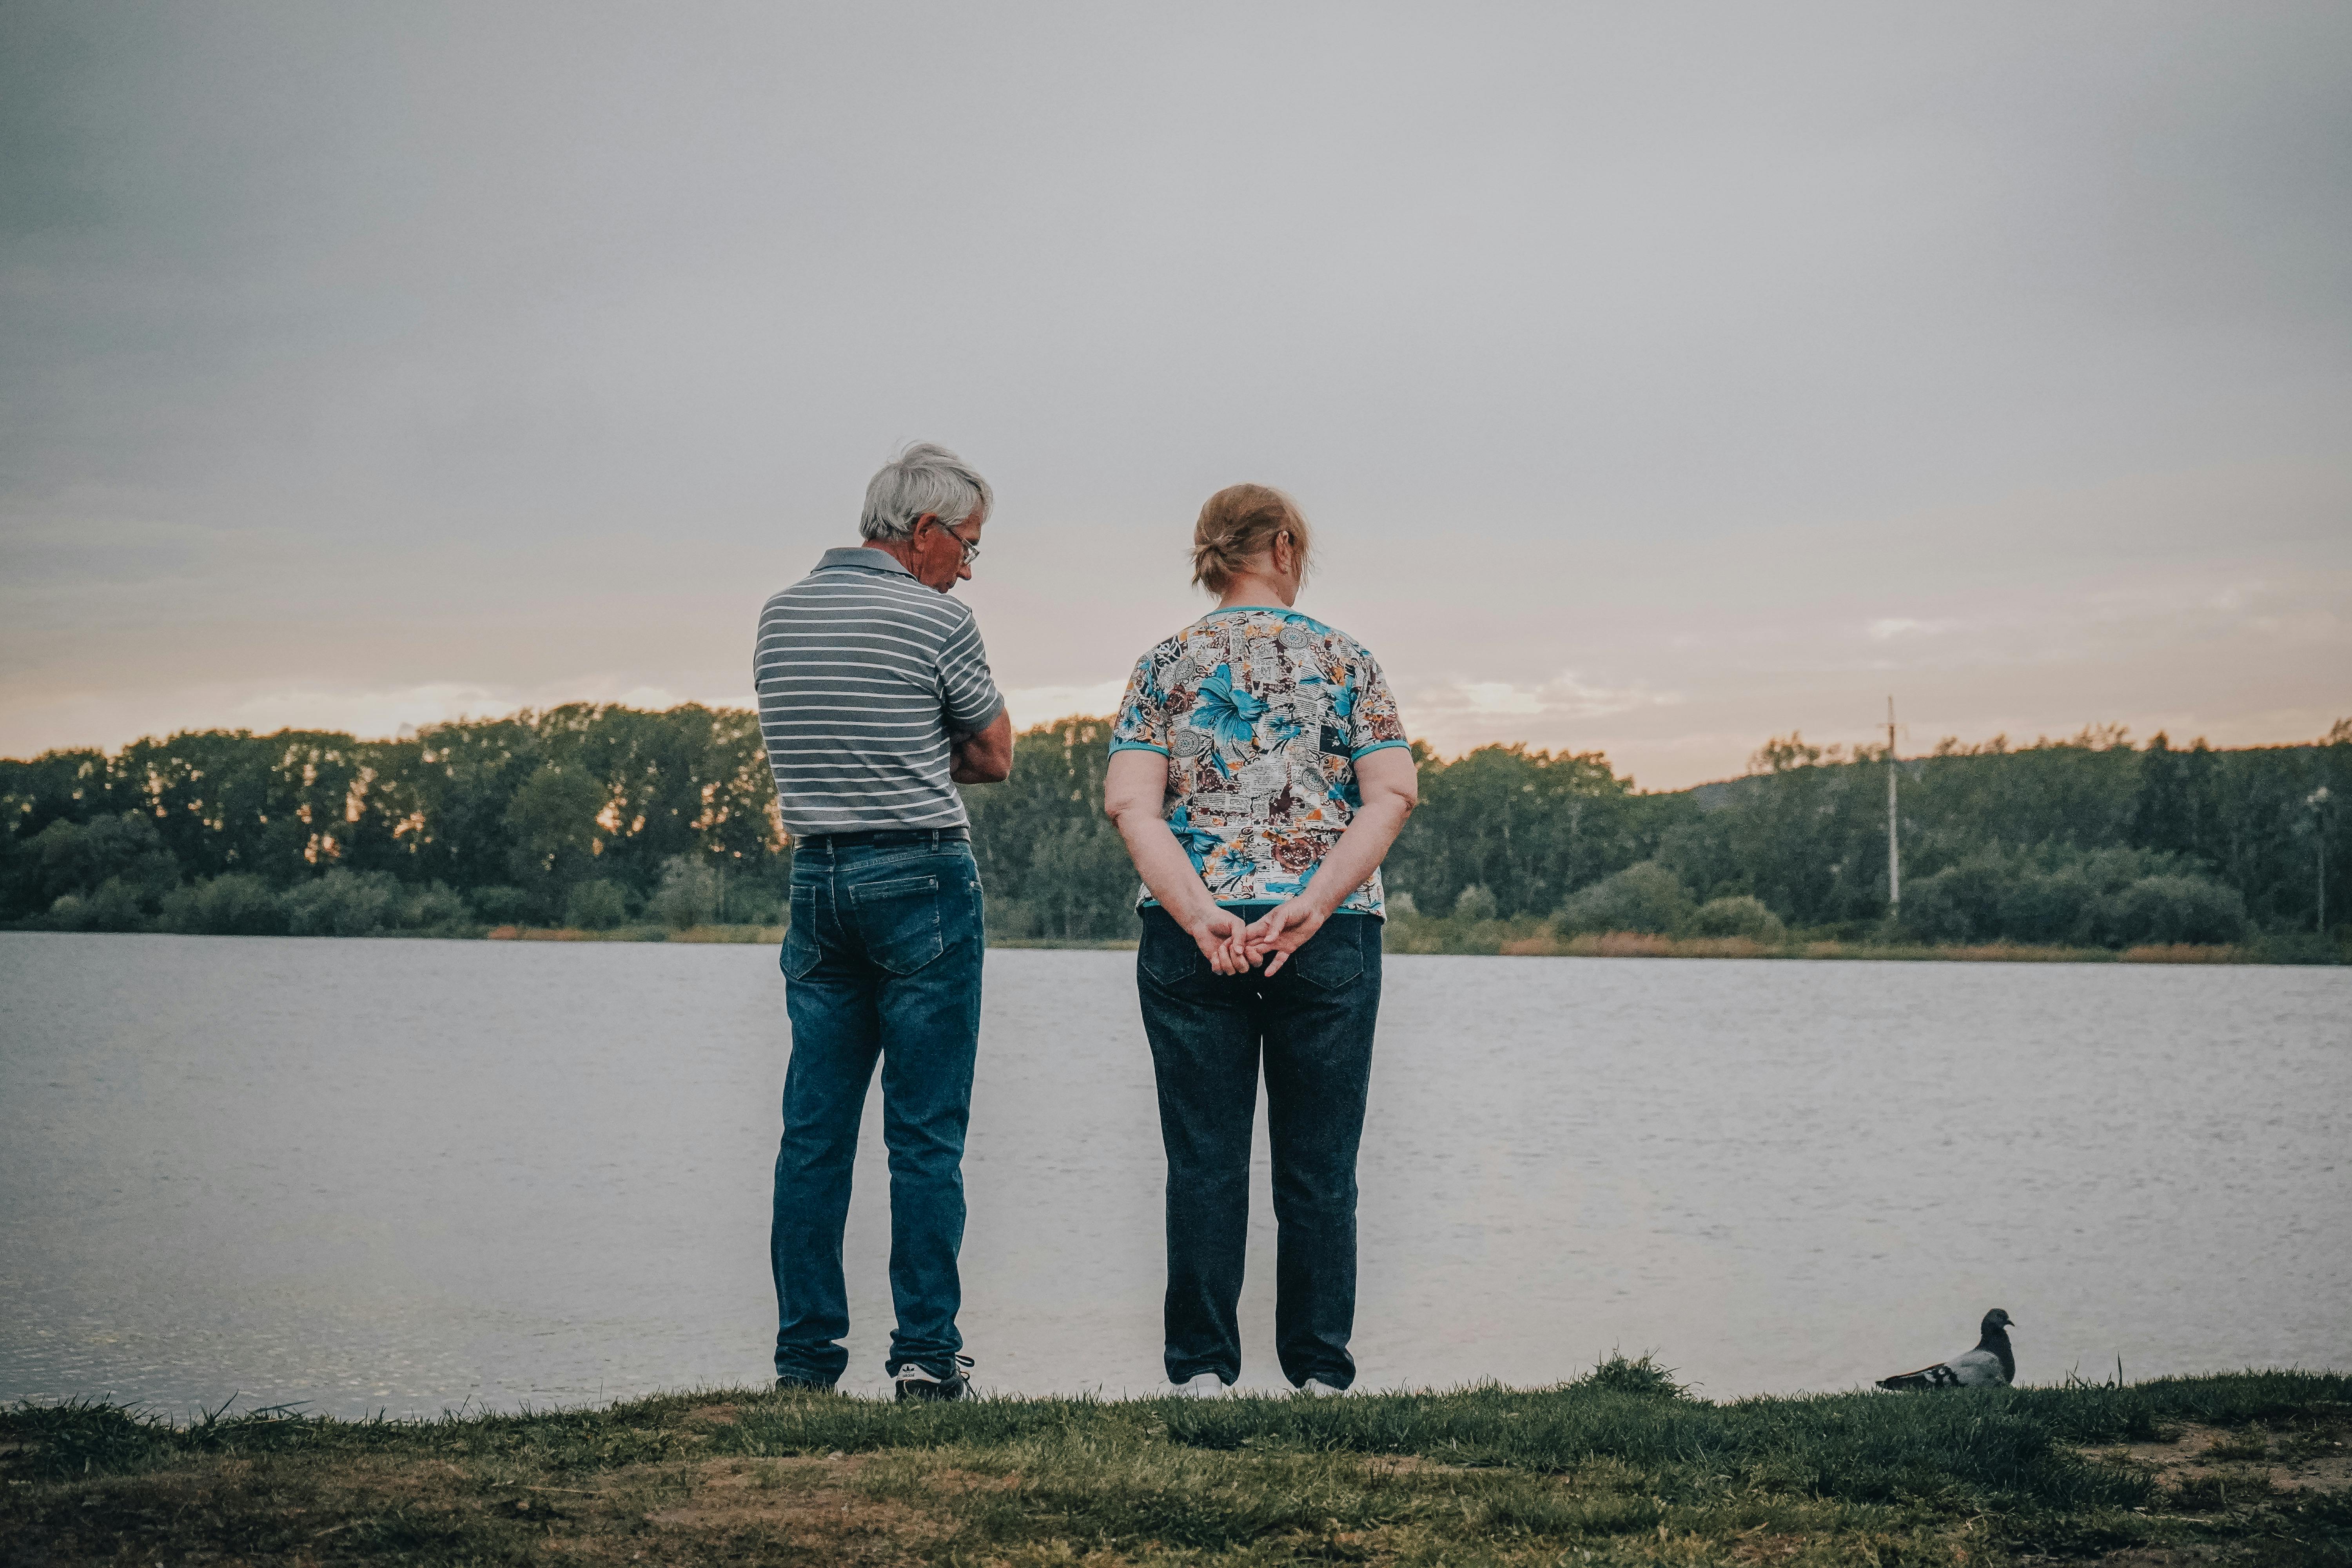 An elderly couple standing by a lake | Source: Pexels